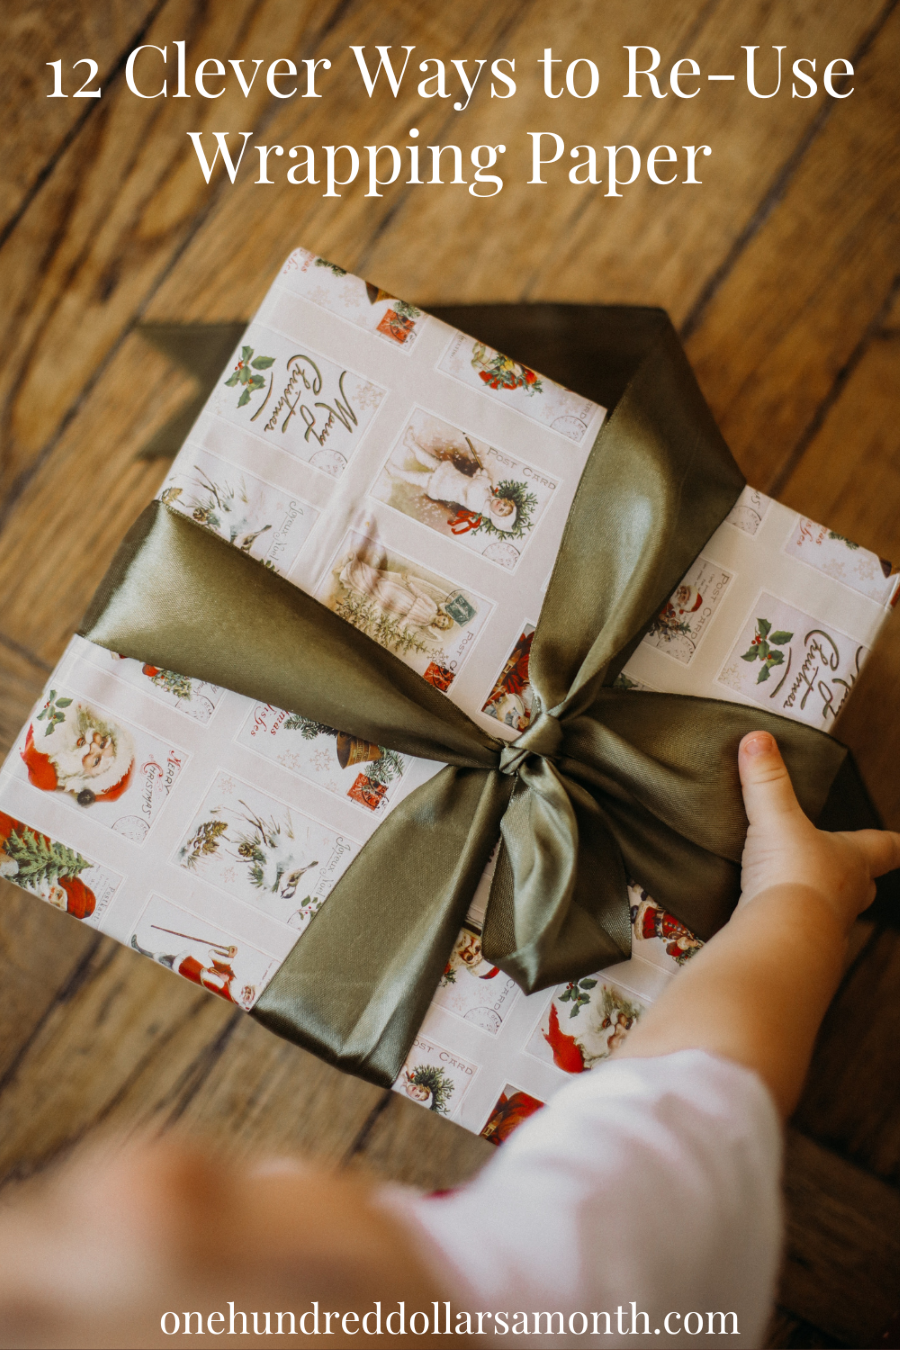 12 Clever Ways to Re-Use Wrapping Paper